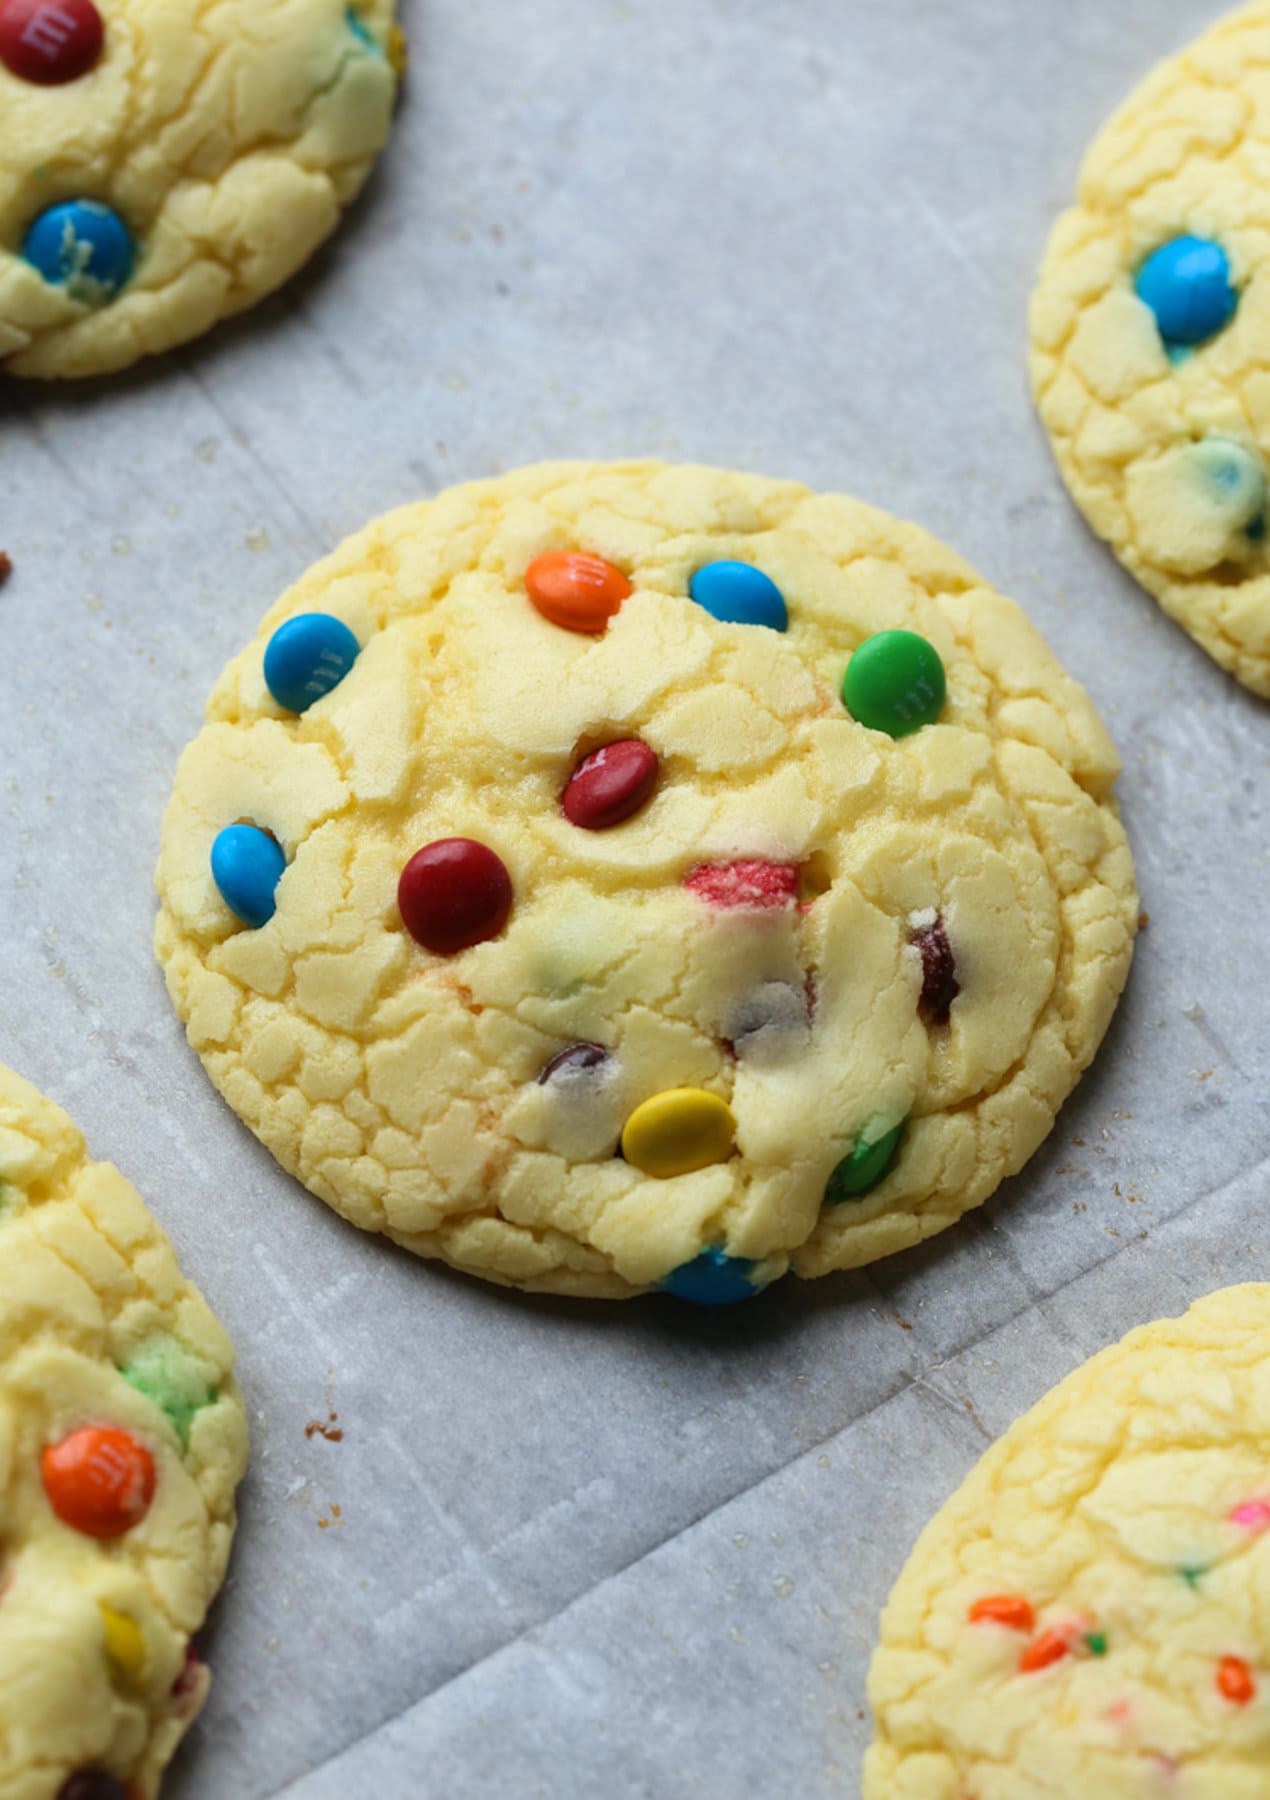 Cake mix cookies with M&Ms.